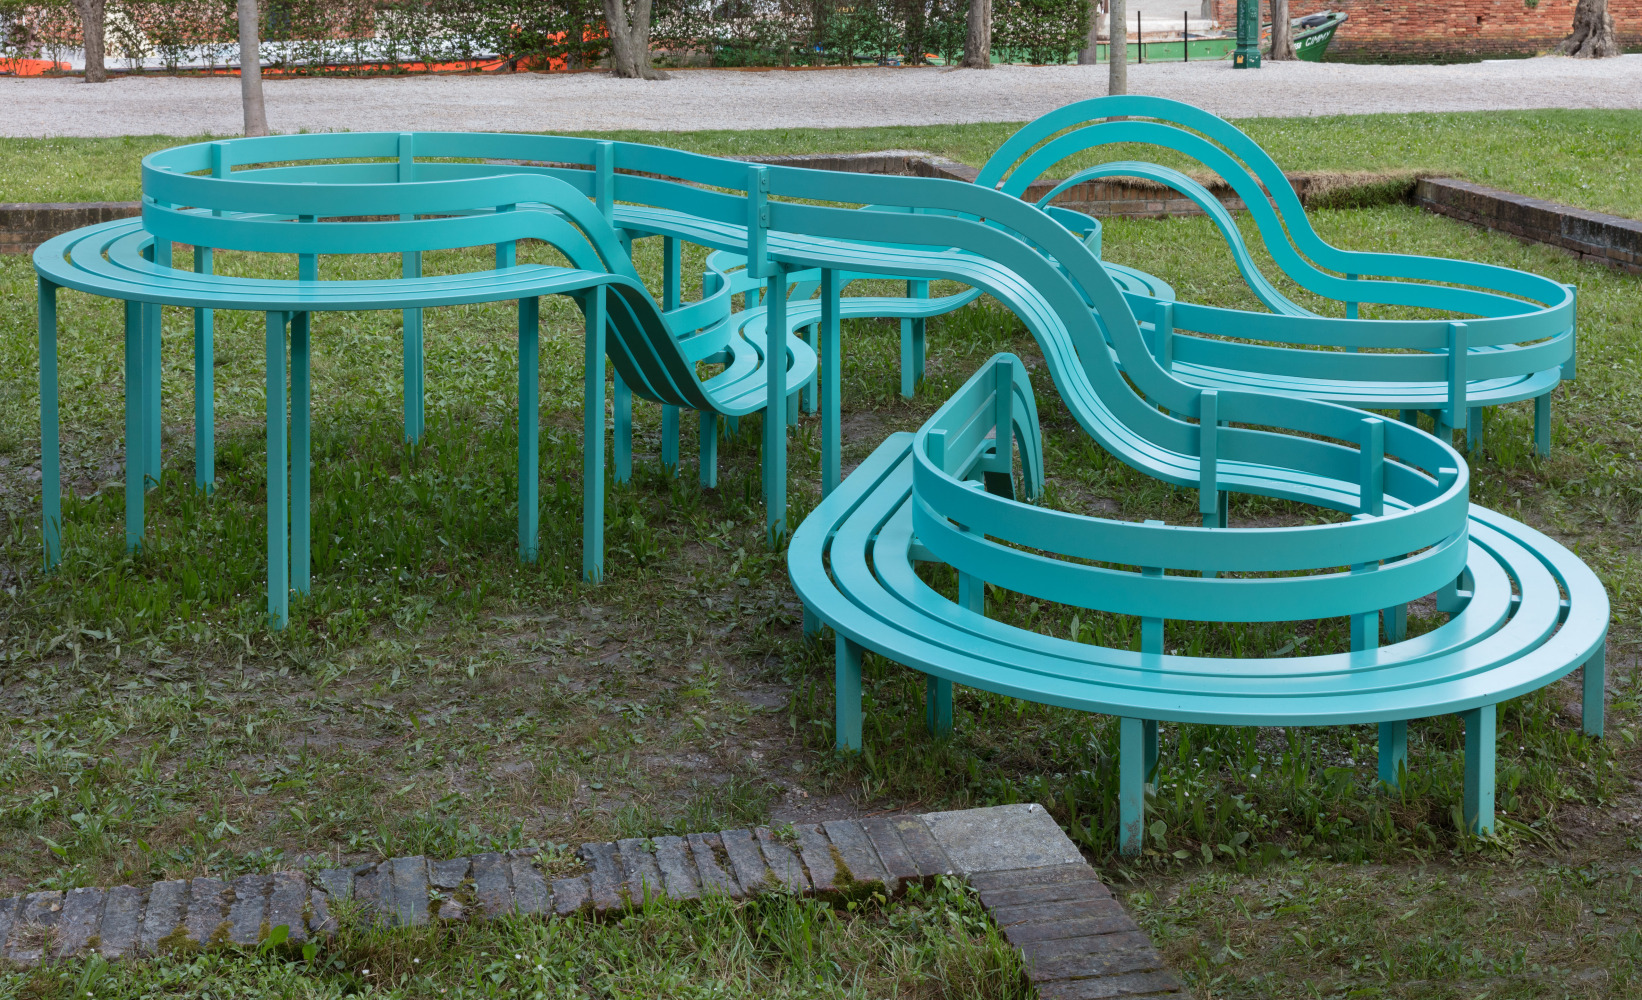 Jeppe Hein

Modified Social Bench for Venice #01

2019

Powder coated aluminum

57 1/8 x 220 7/8 x 209 1/2 inches (145 x 561 x 532 cm)

Edition of 3, with 2 AP

JH 517